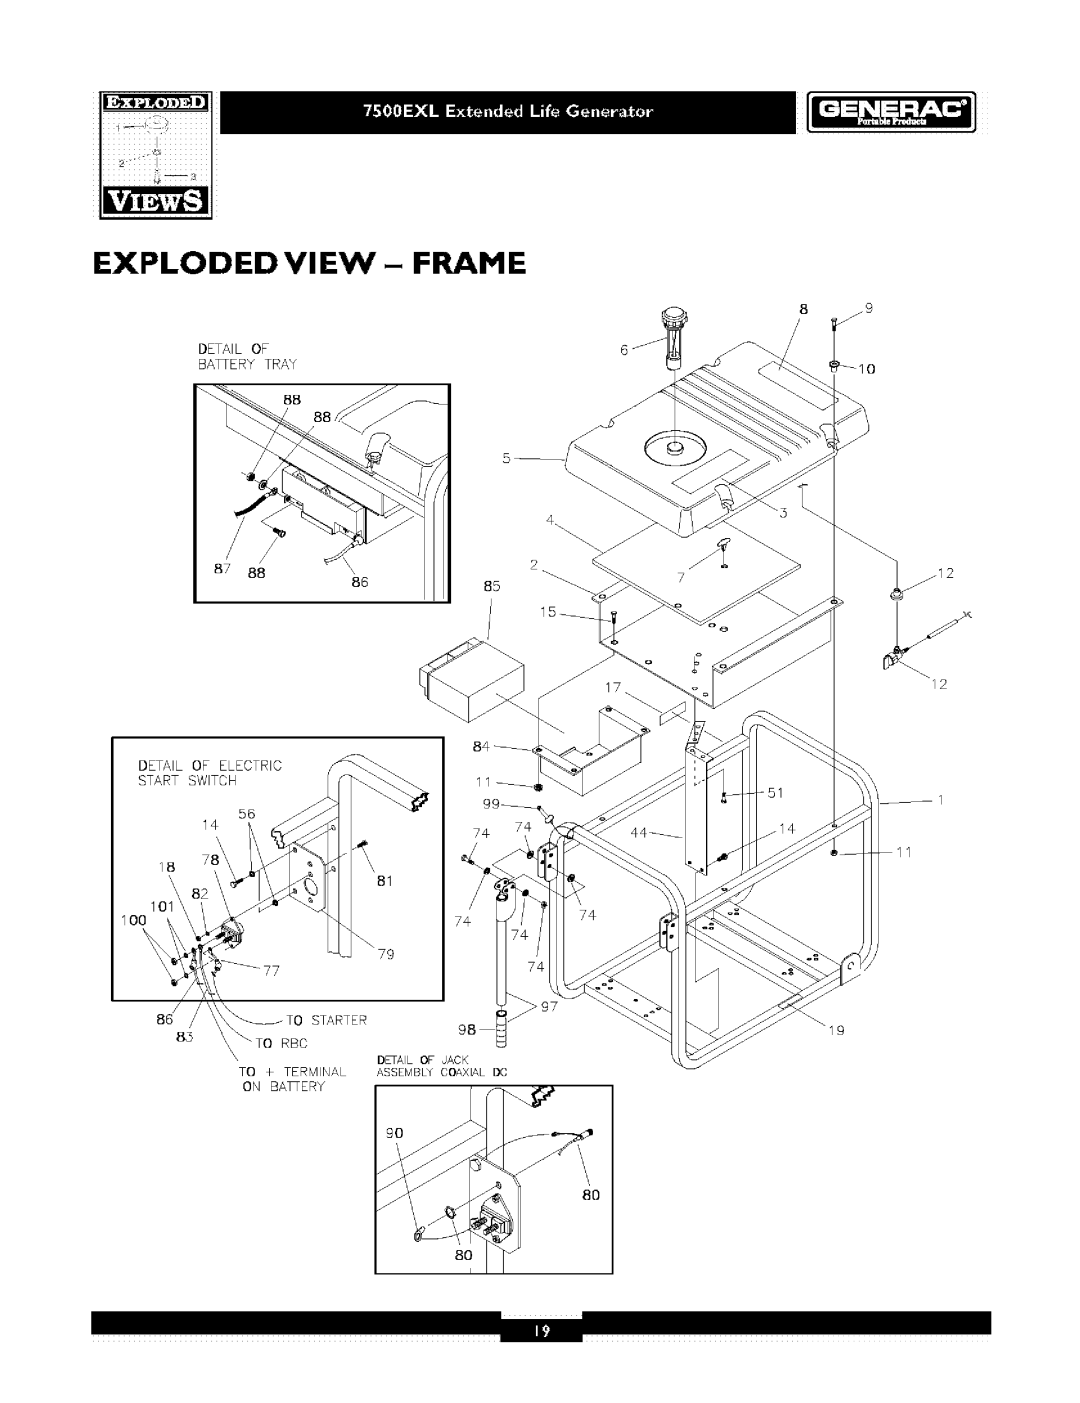 Generac 1019-3 owner manual Exploded View - Frame, DETAIL OF BAWERY TRAY 88 88, DETAIL OF ELECTRIC START SWITCH 56 14 